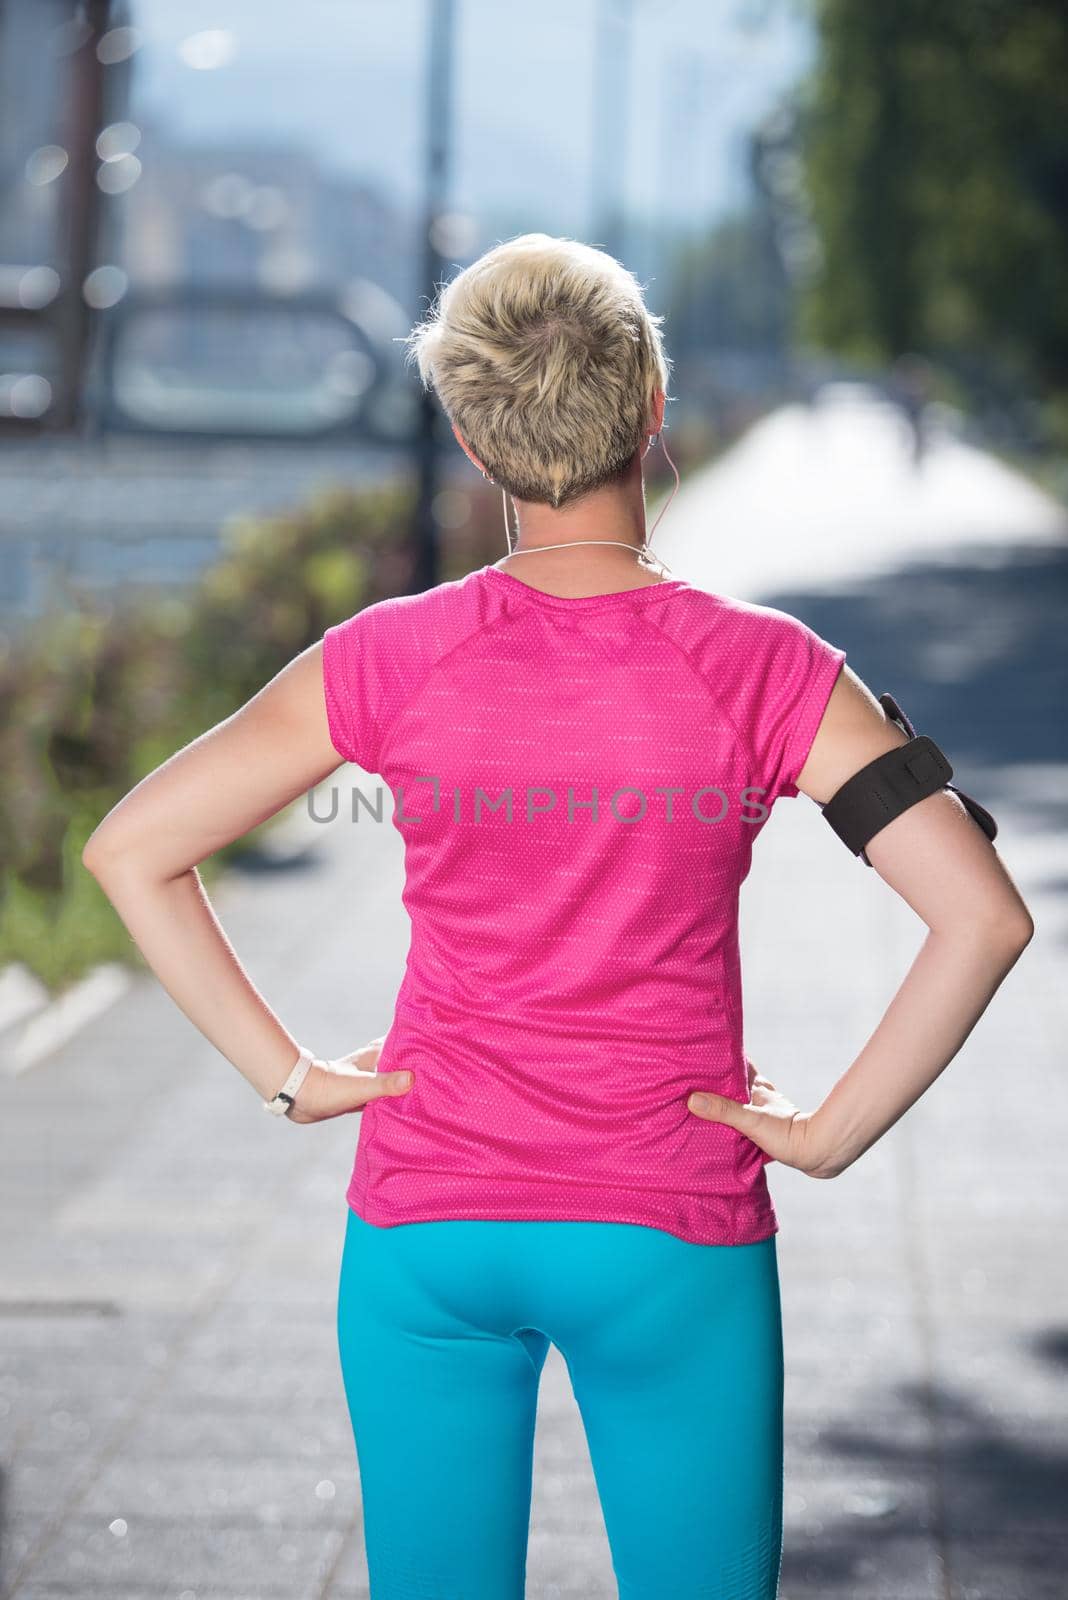 jogging woman setting music and running route on  smart phone putting  earphones before morning run